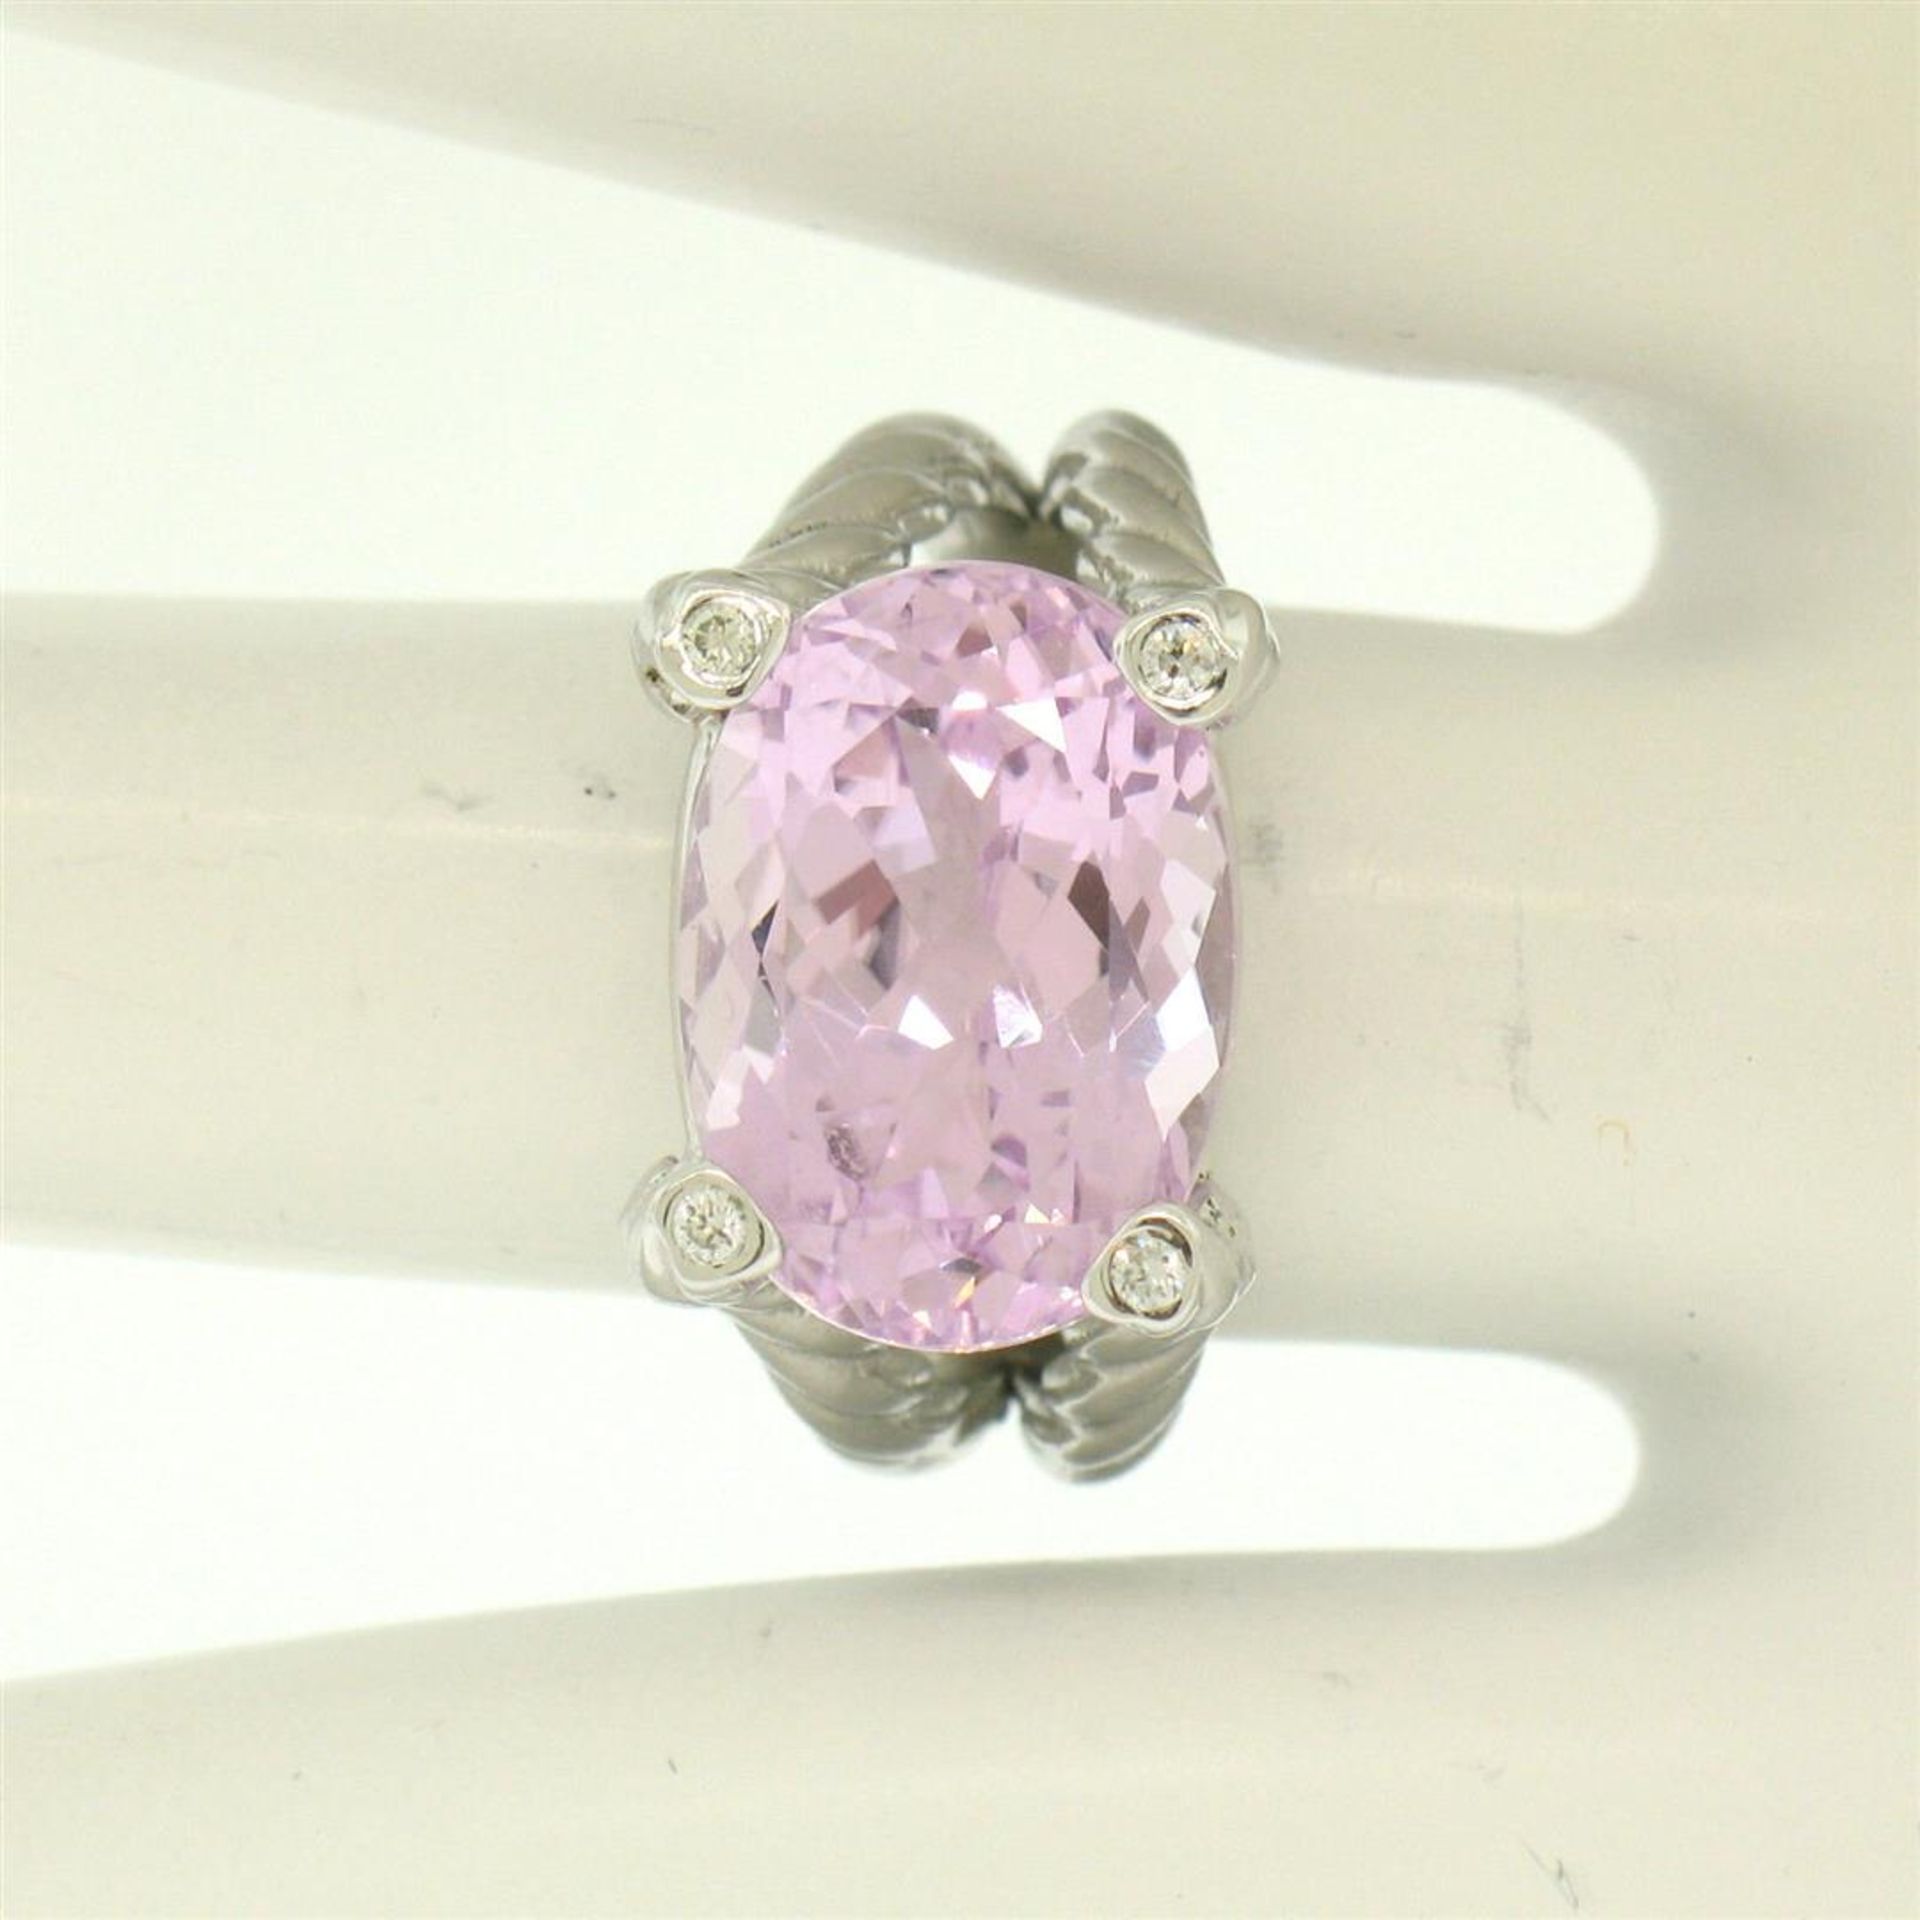 14k White Gold Twisted Cable 8.5 ct Oval Kunzite Solitaire Ring 4 Diamond Accent - Image 8 of 8